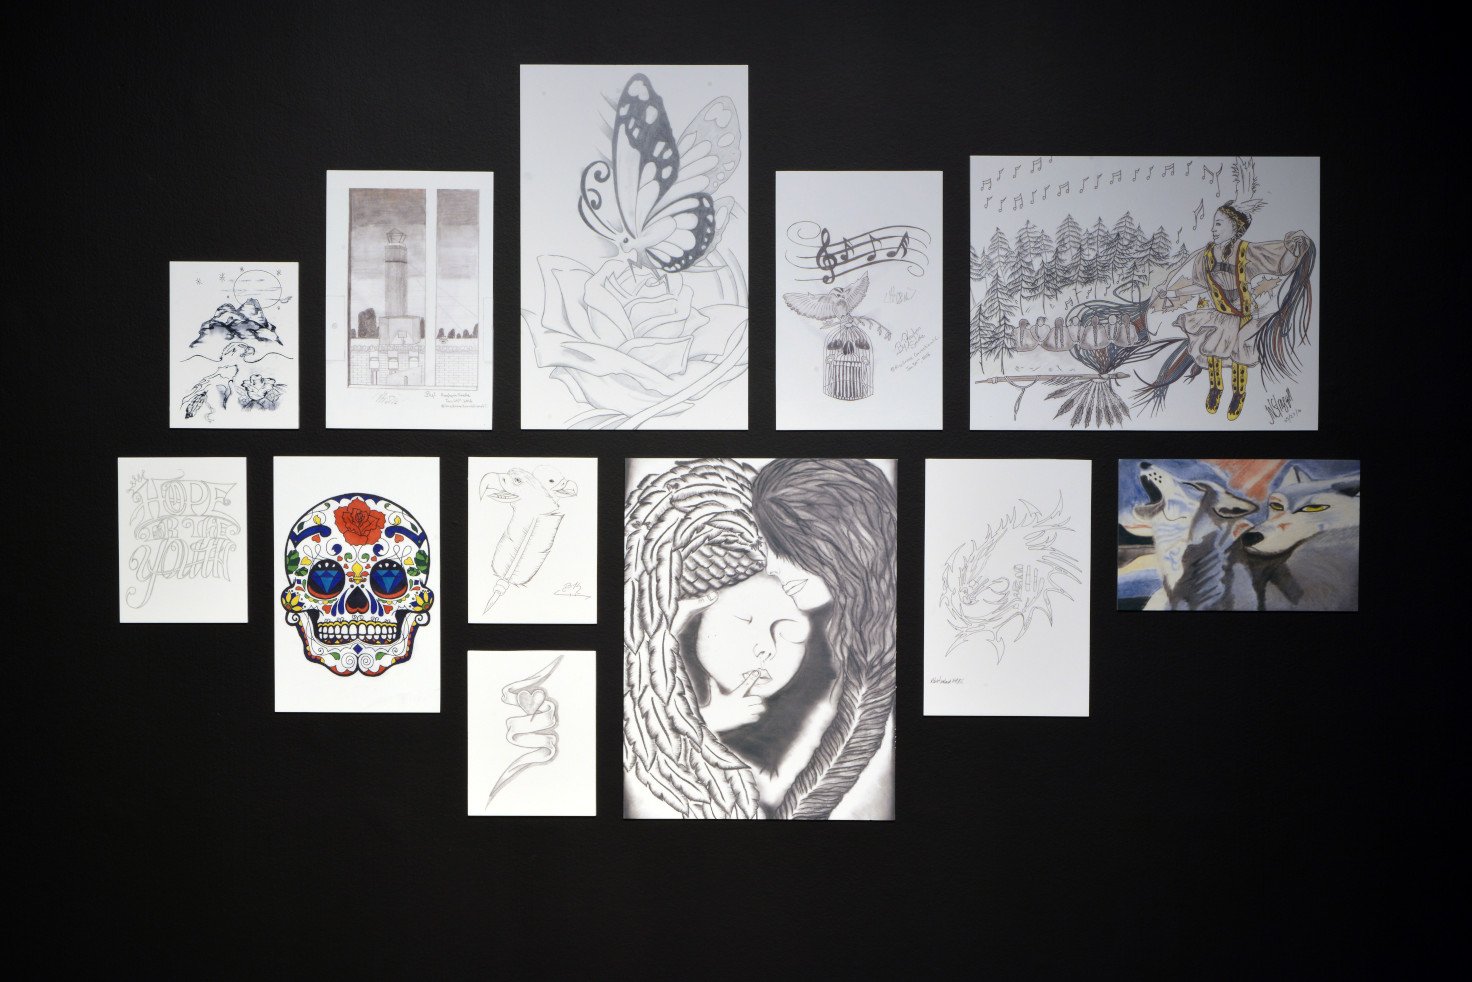  Artwork created by participants of  Why the Caged Bird Sings  workshops. 